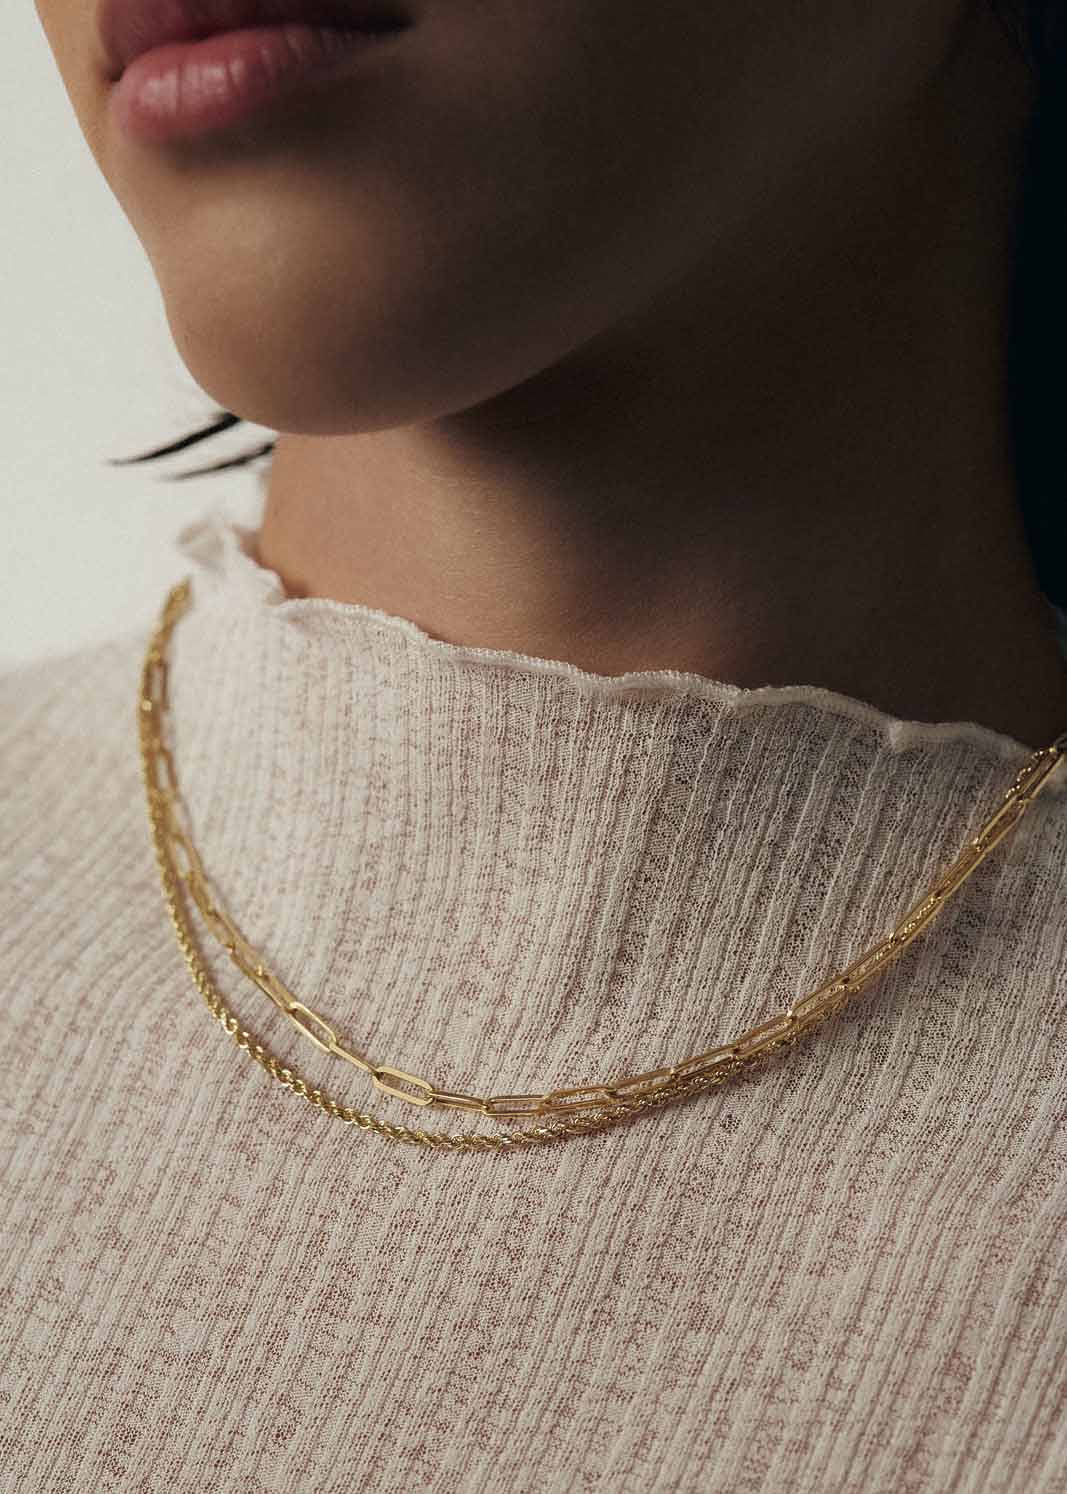 Rope Chain Necklace 14k Gold - Kinn